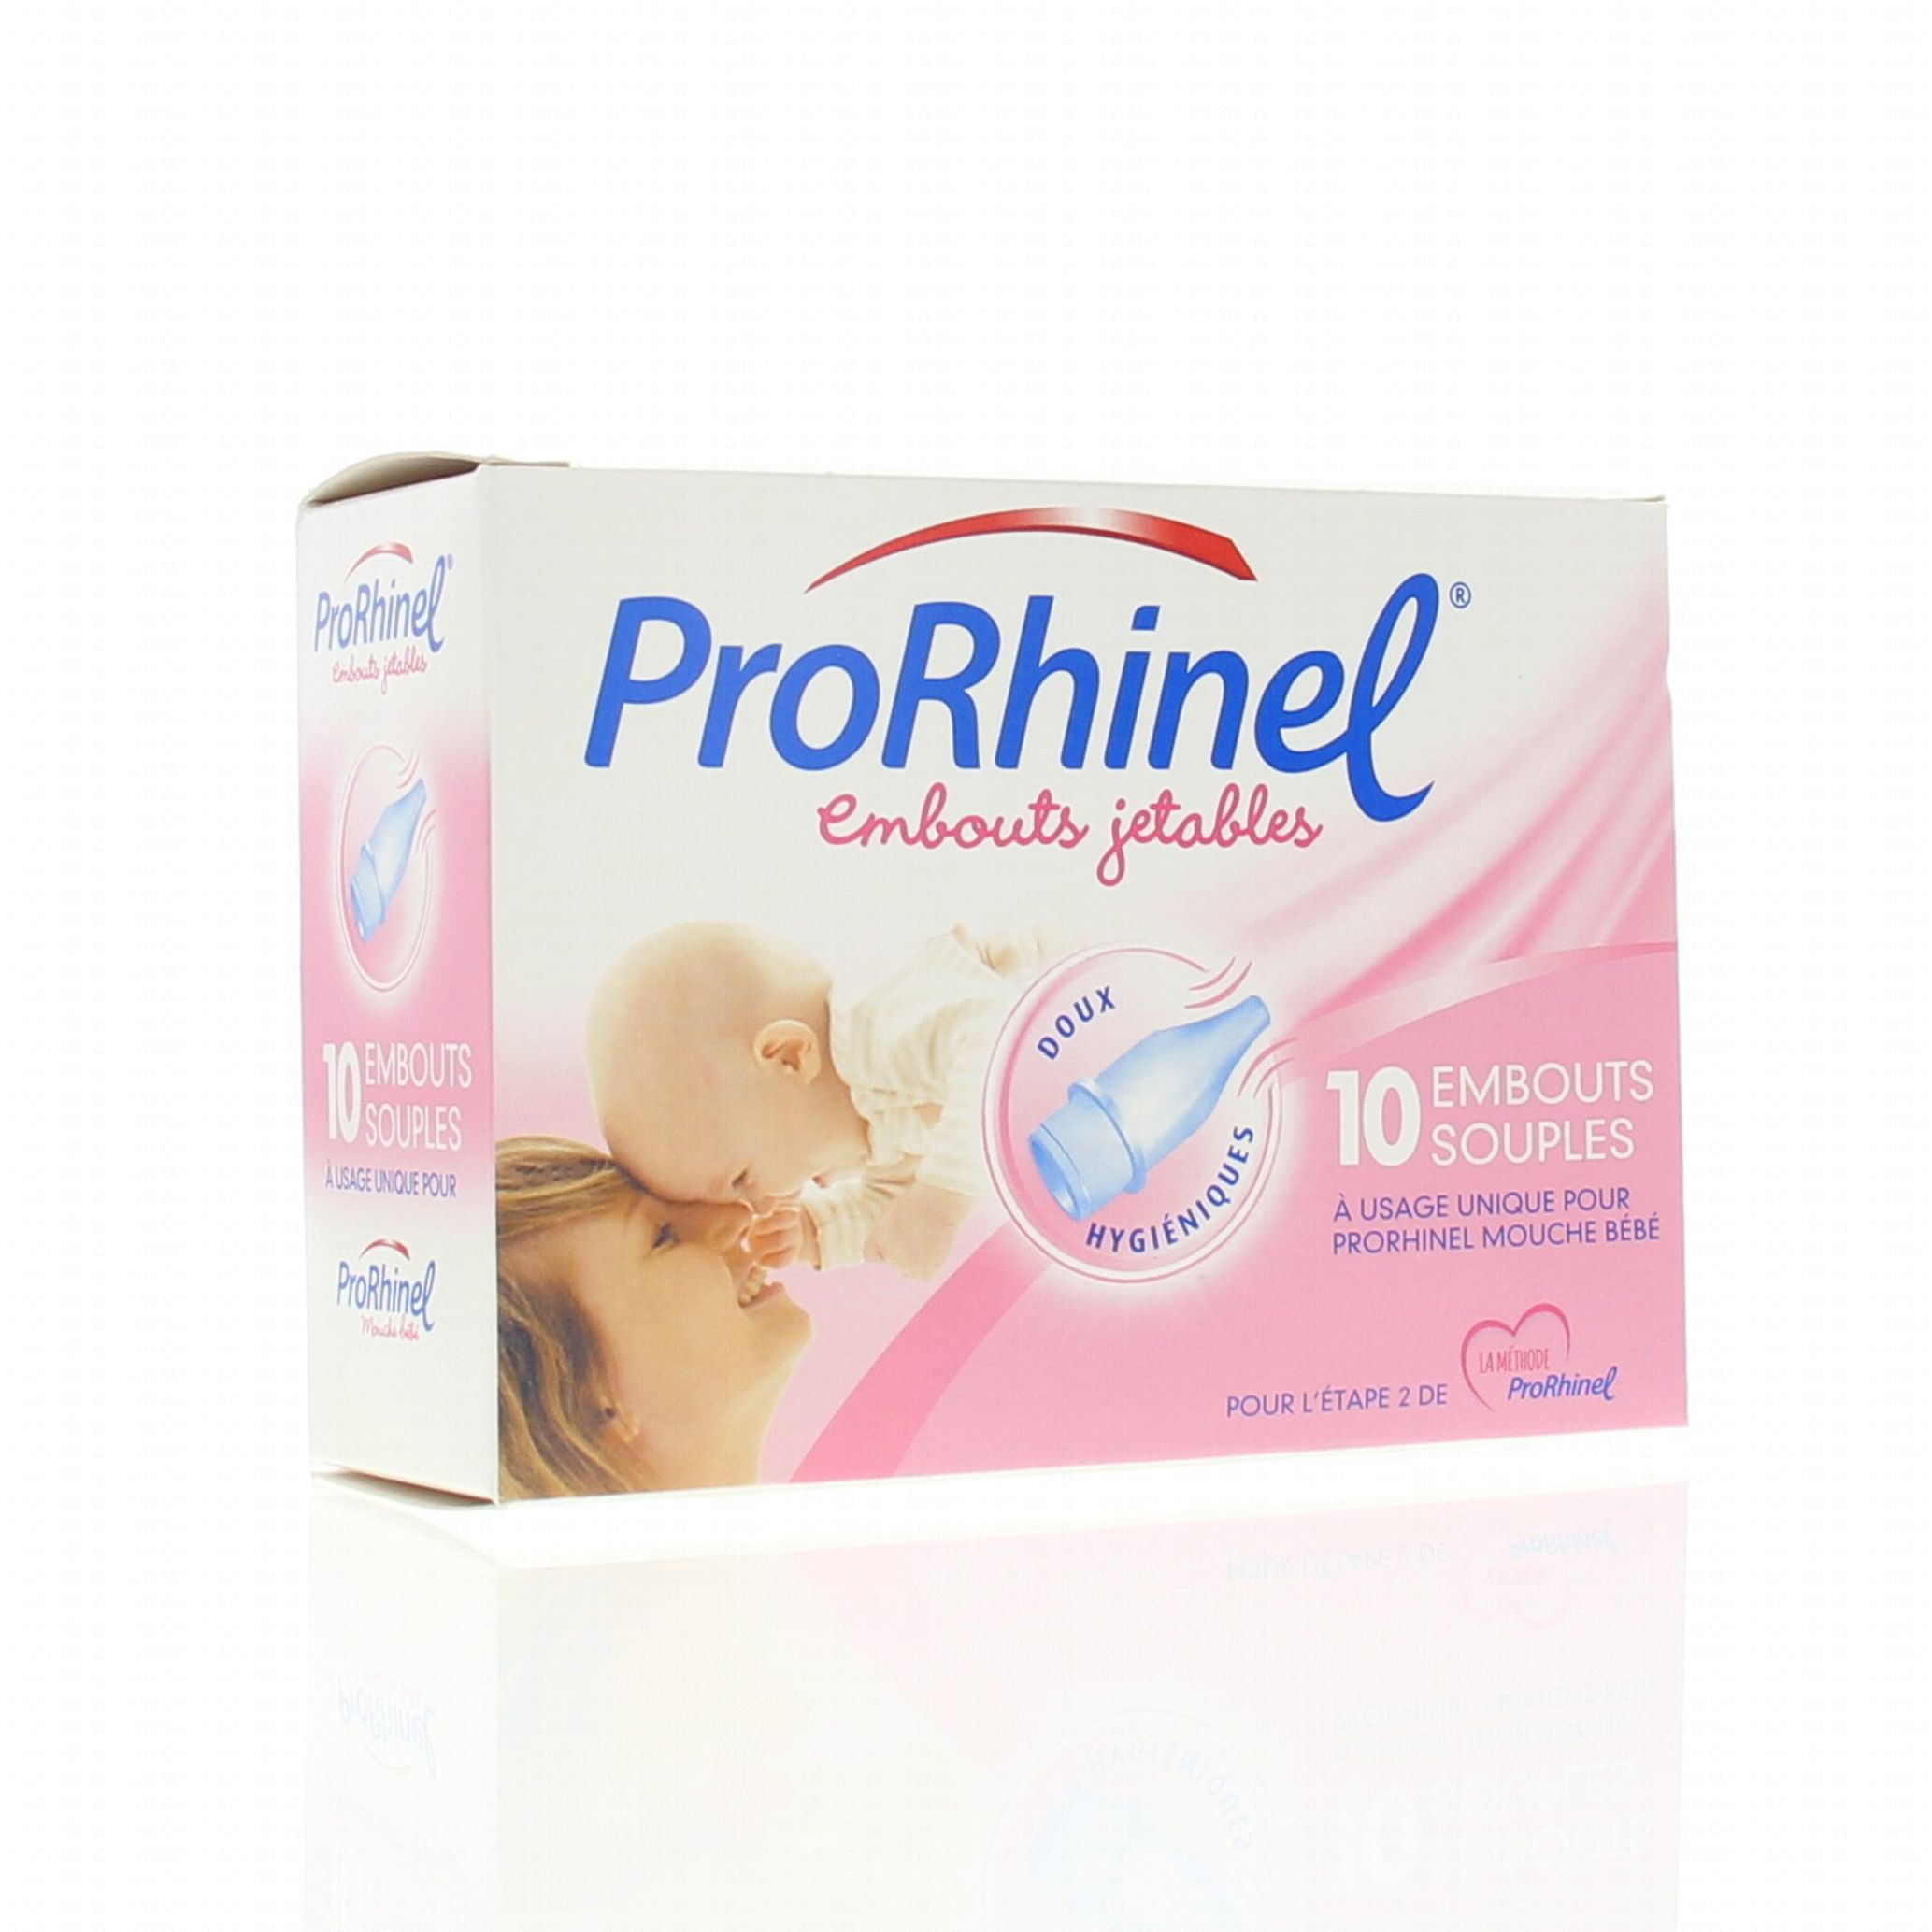 EMBOUTS POUR MOUCHE BEBE x10 PRORHINEL